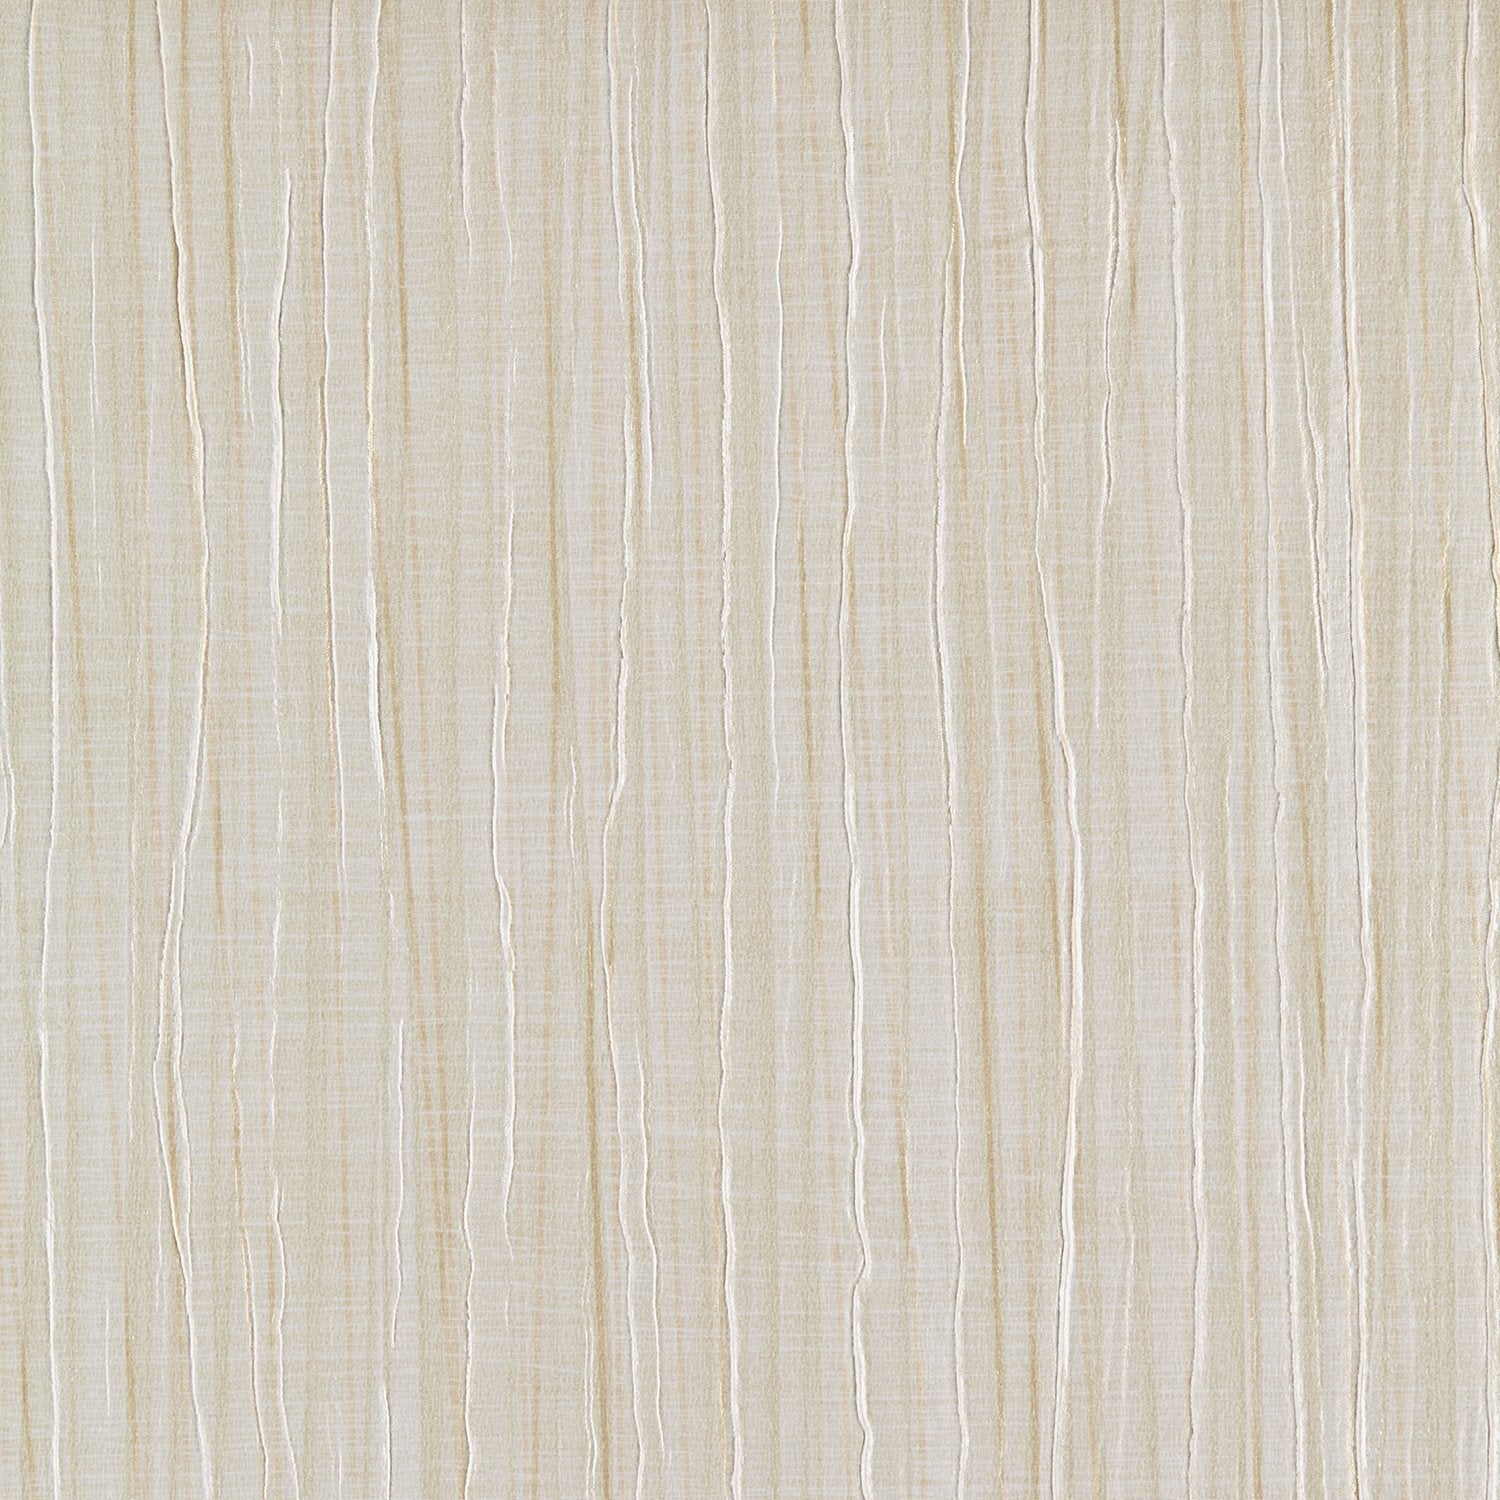 Vogue Pleat - Y47021 - Wallcovering - Vycon - Kube Contract